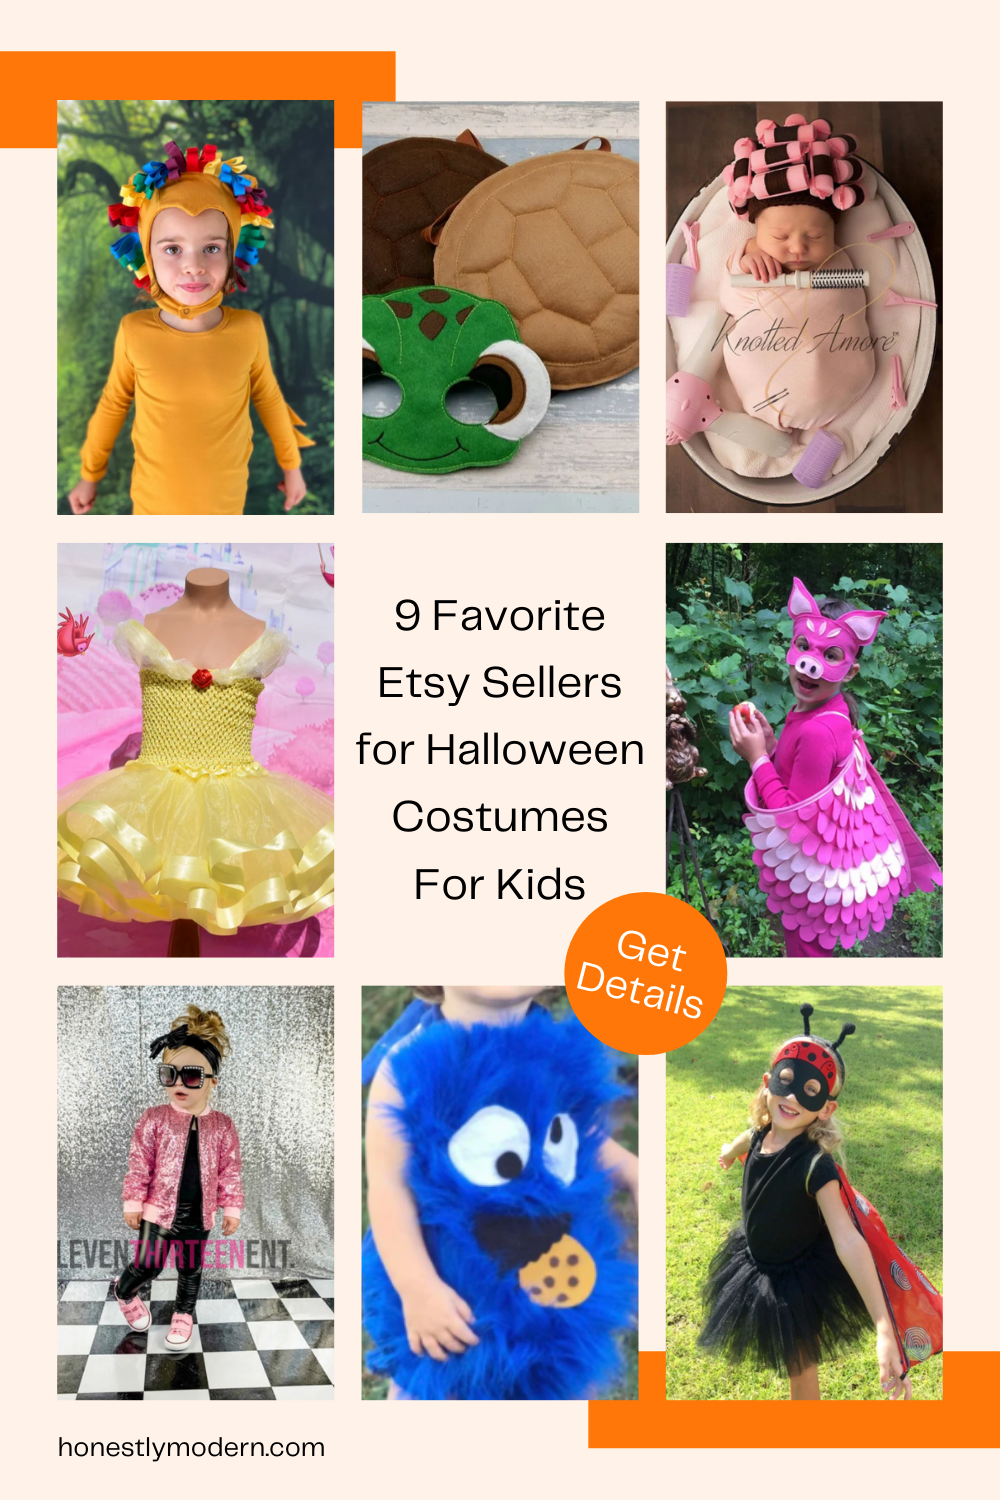 9 Favorite Etsy Sellers for Halloween Costumes For Kids